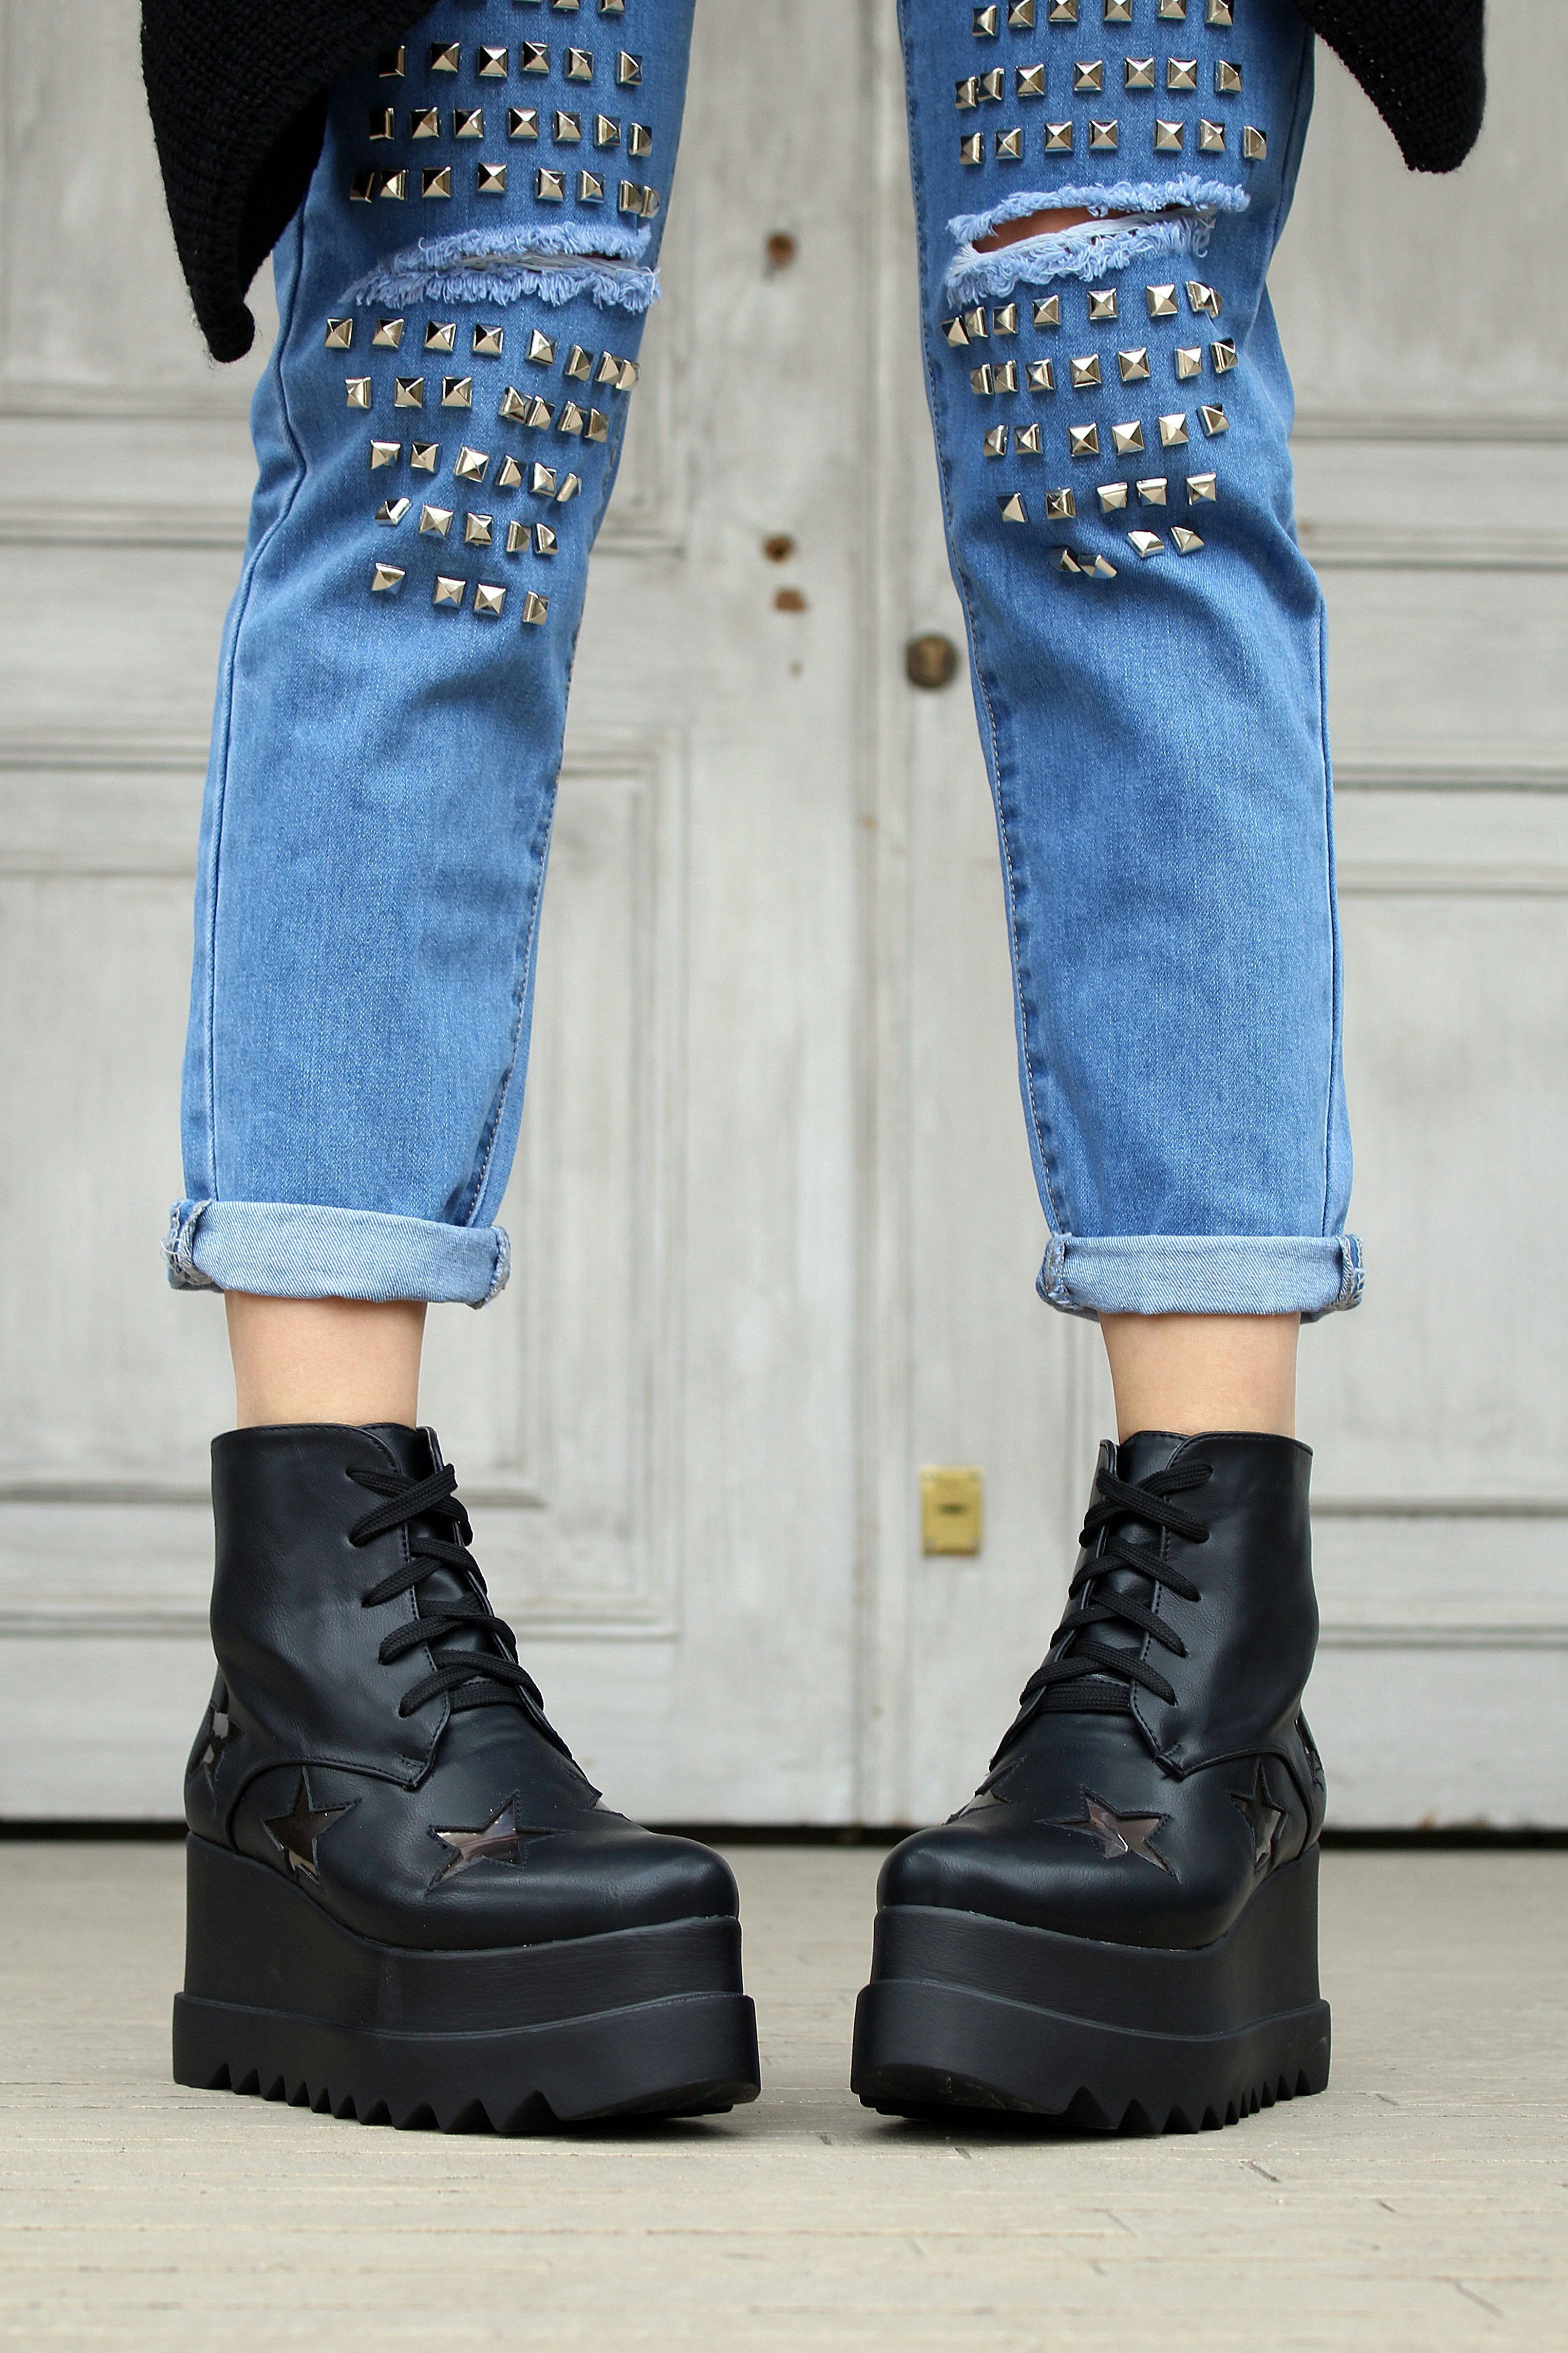 person in blue denim distressed jeans and black platform boots